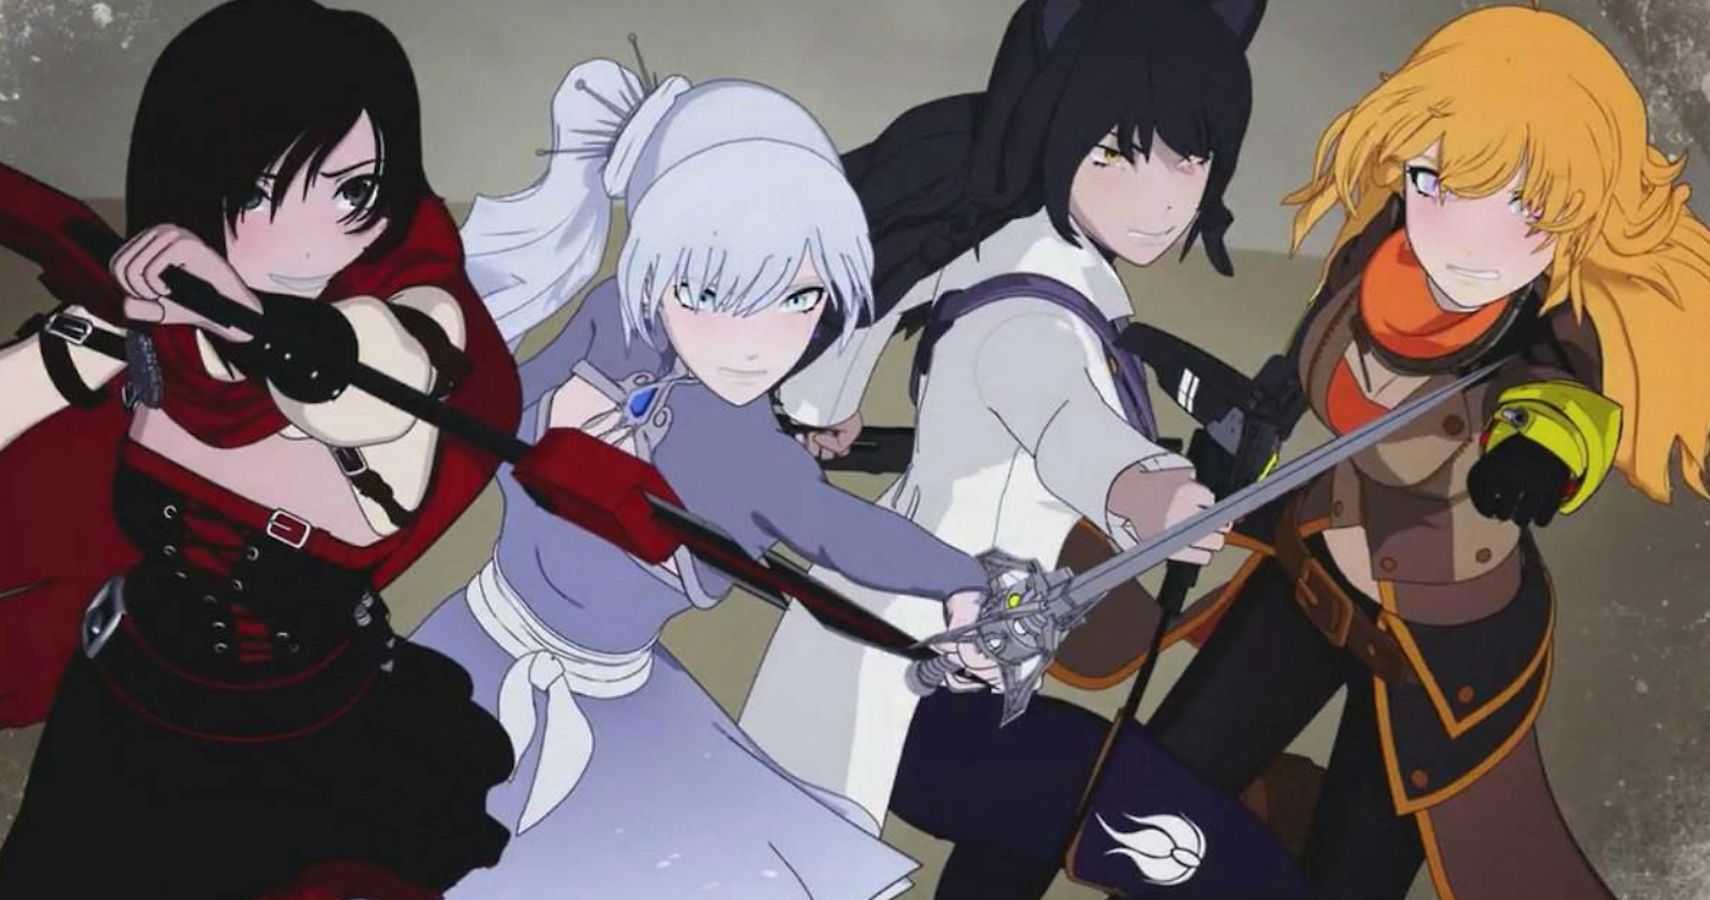 Where can I watch RWBY for free?